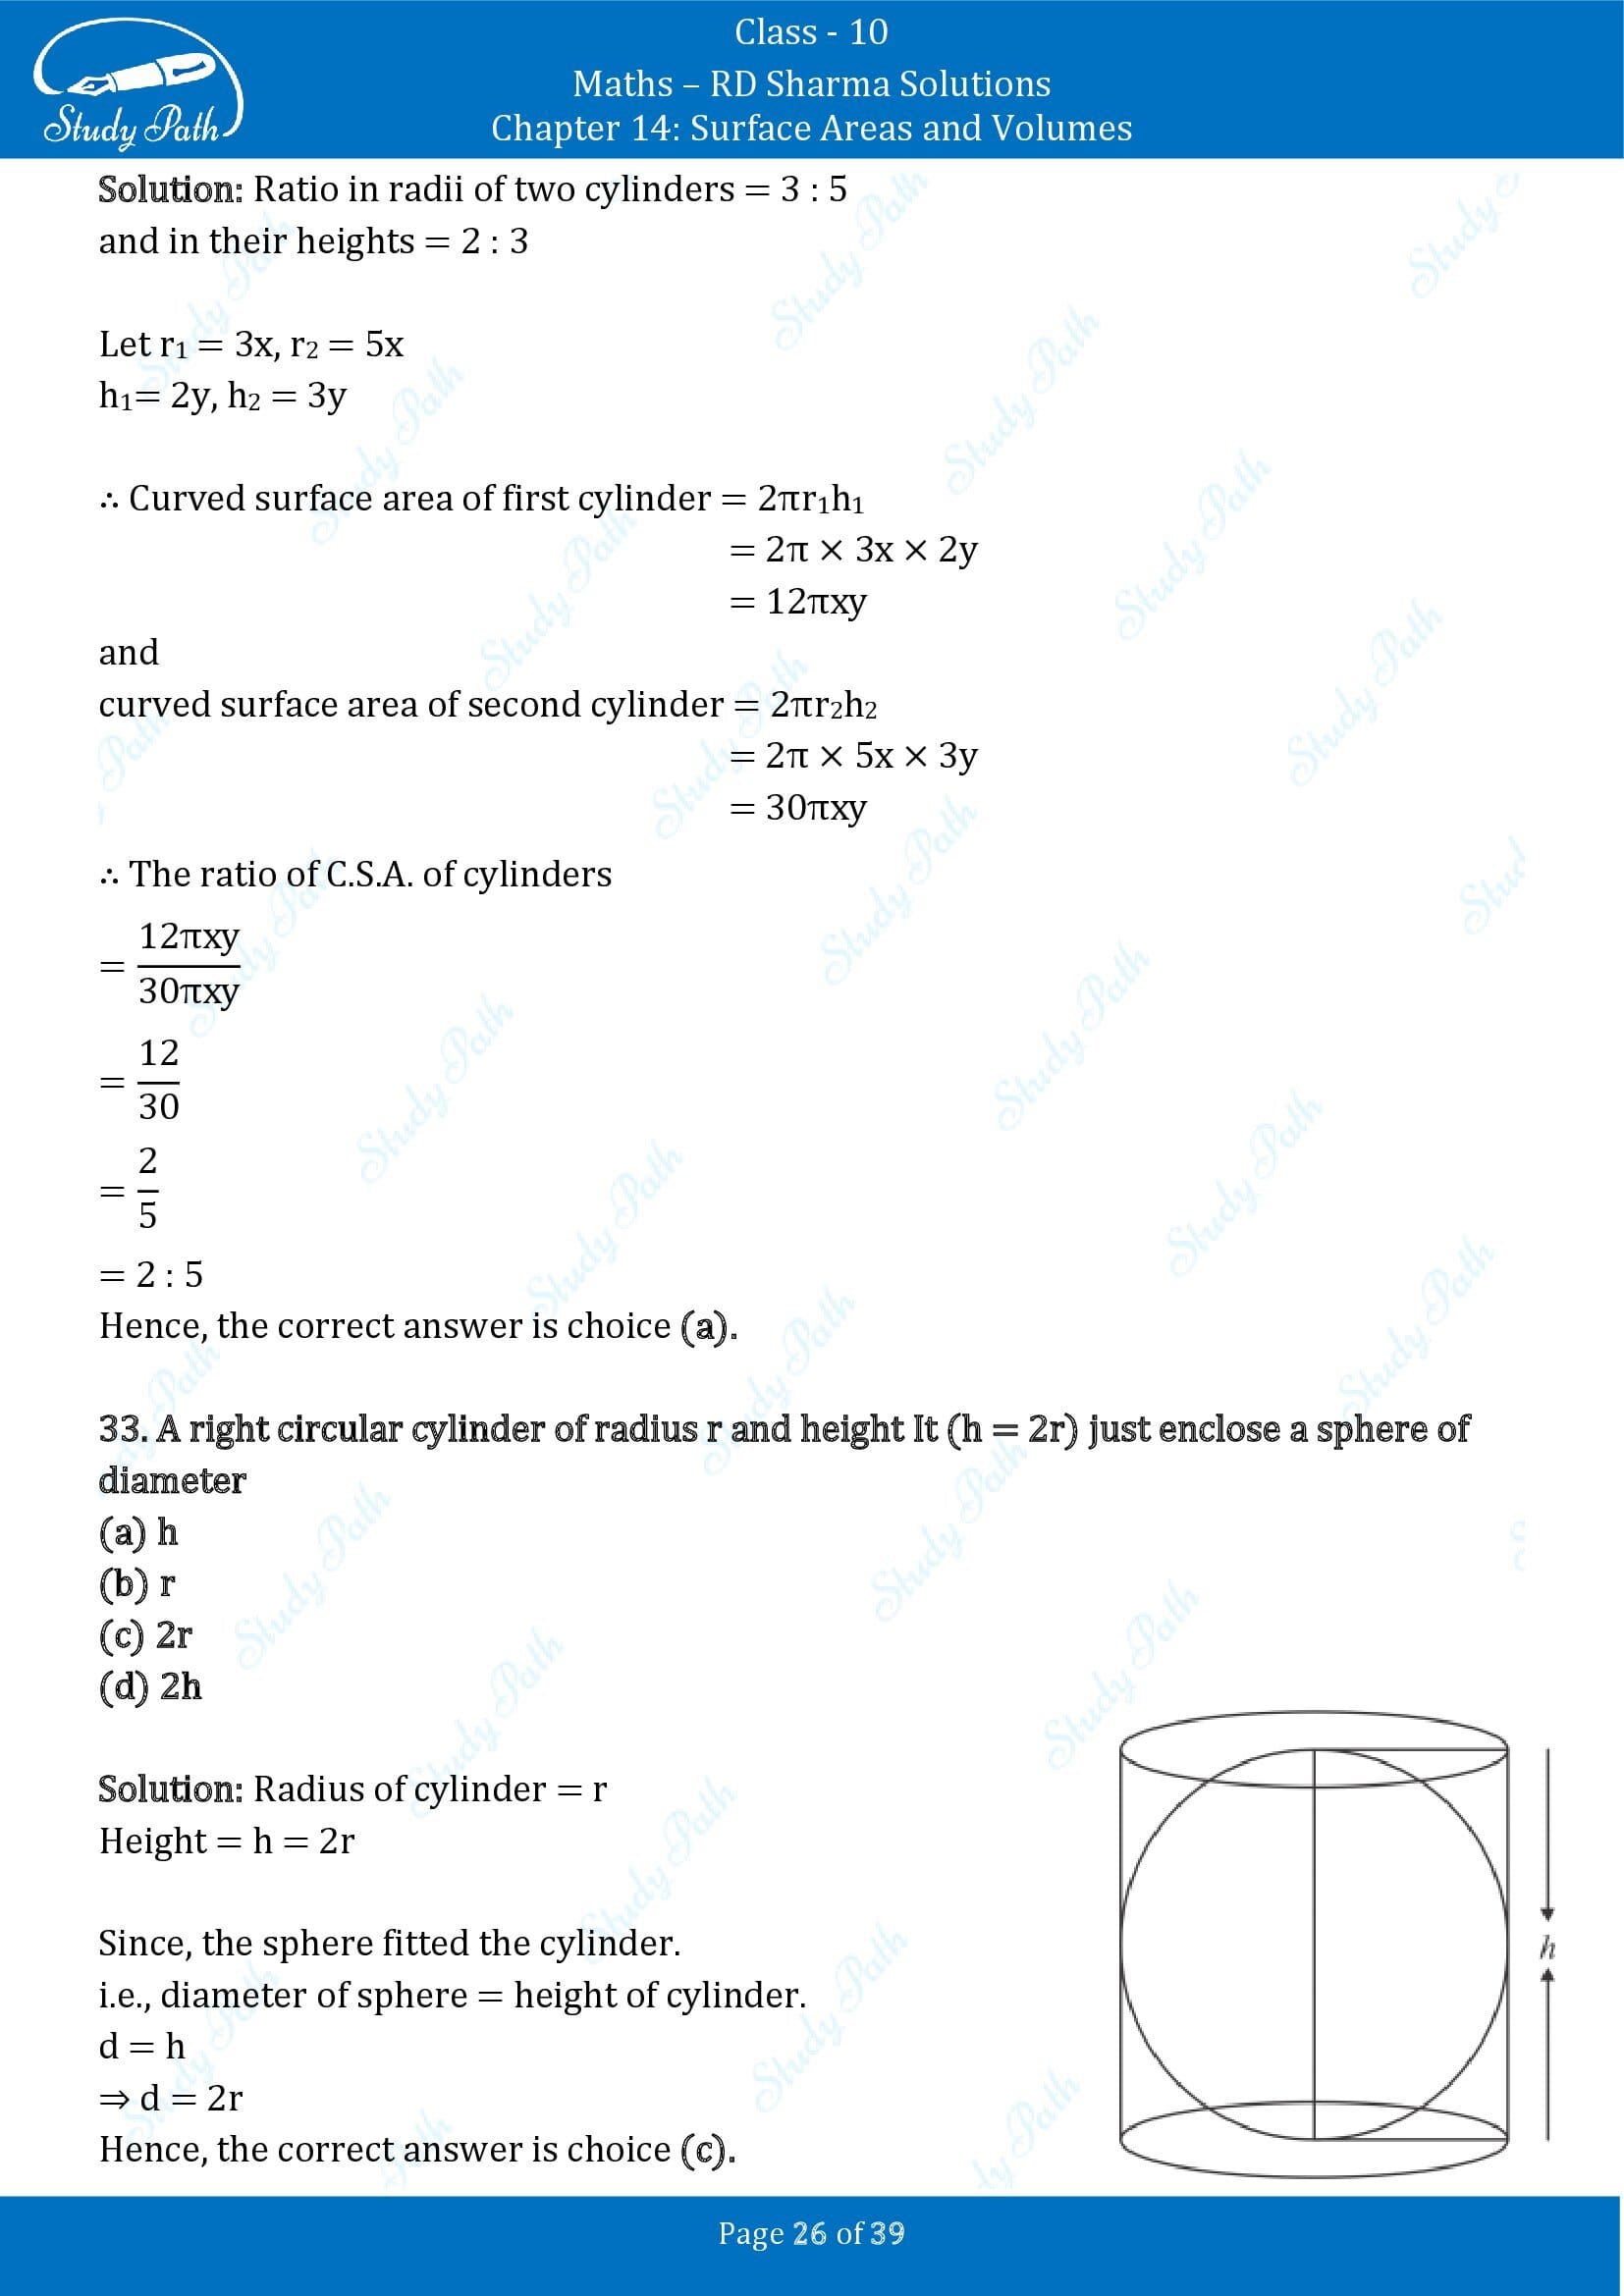 RD Sharma Solutions Class 10 Chapter 14 Surface Areas and Volumes Multiple Choice Question MCQs 00026